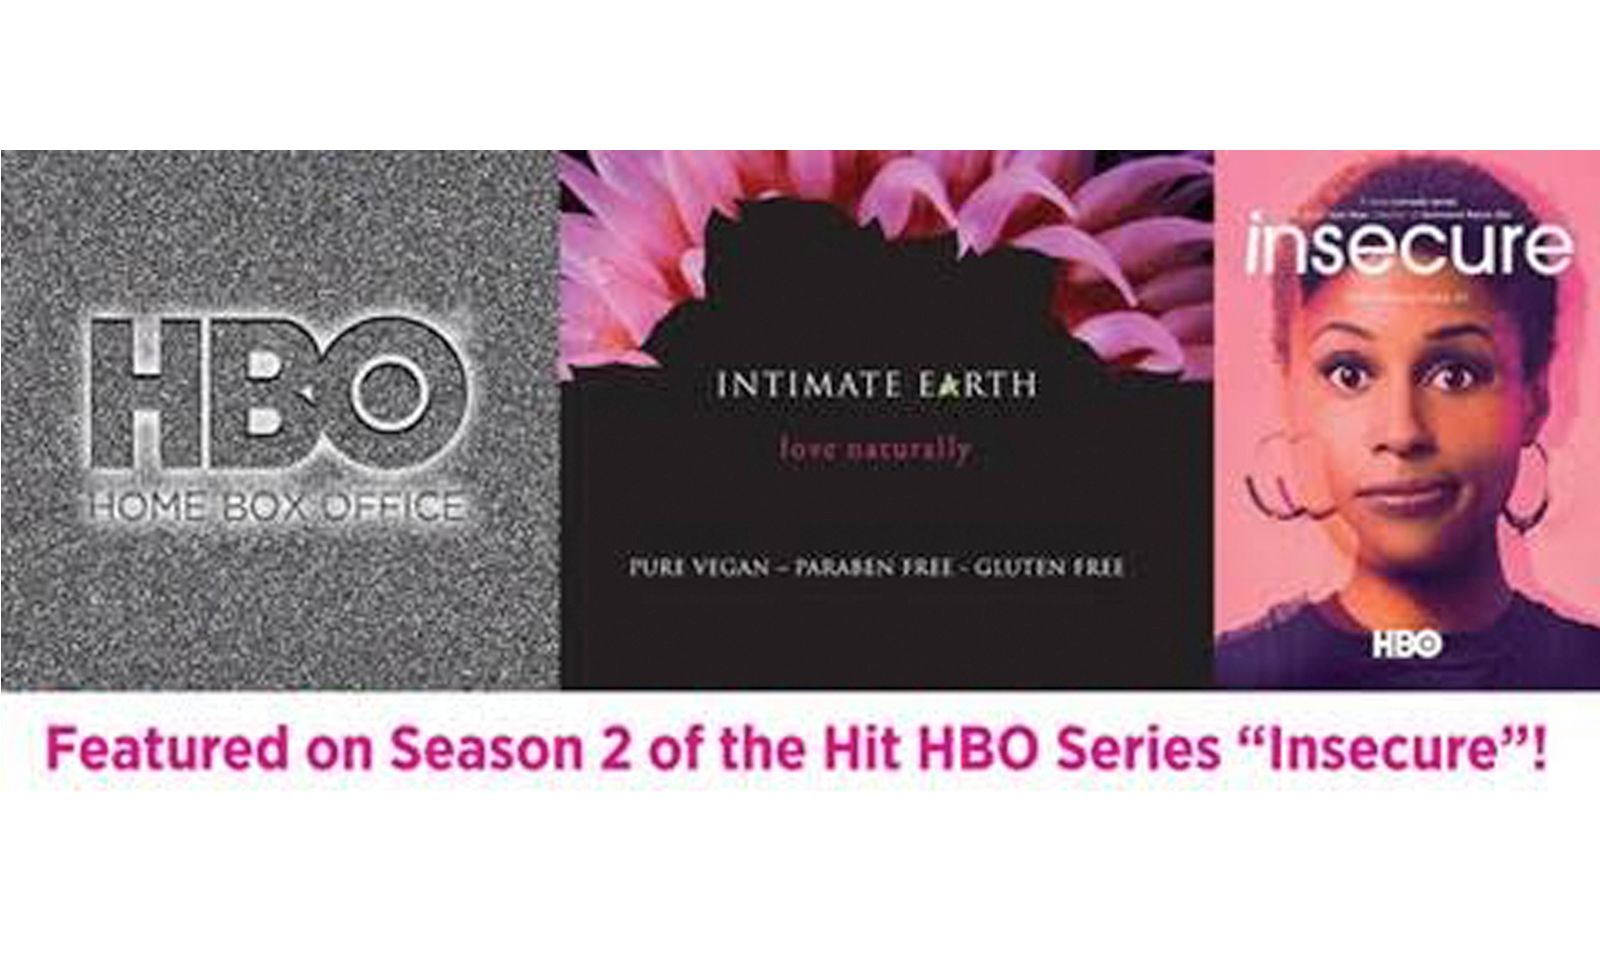 HBO’S ‘Insecure’ Features Intimate Earth Products